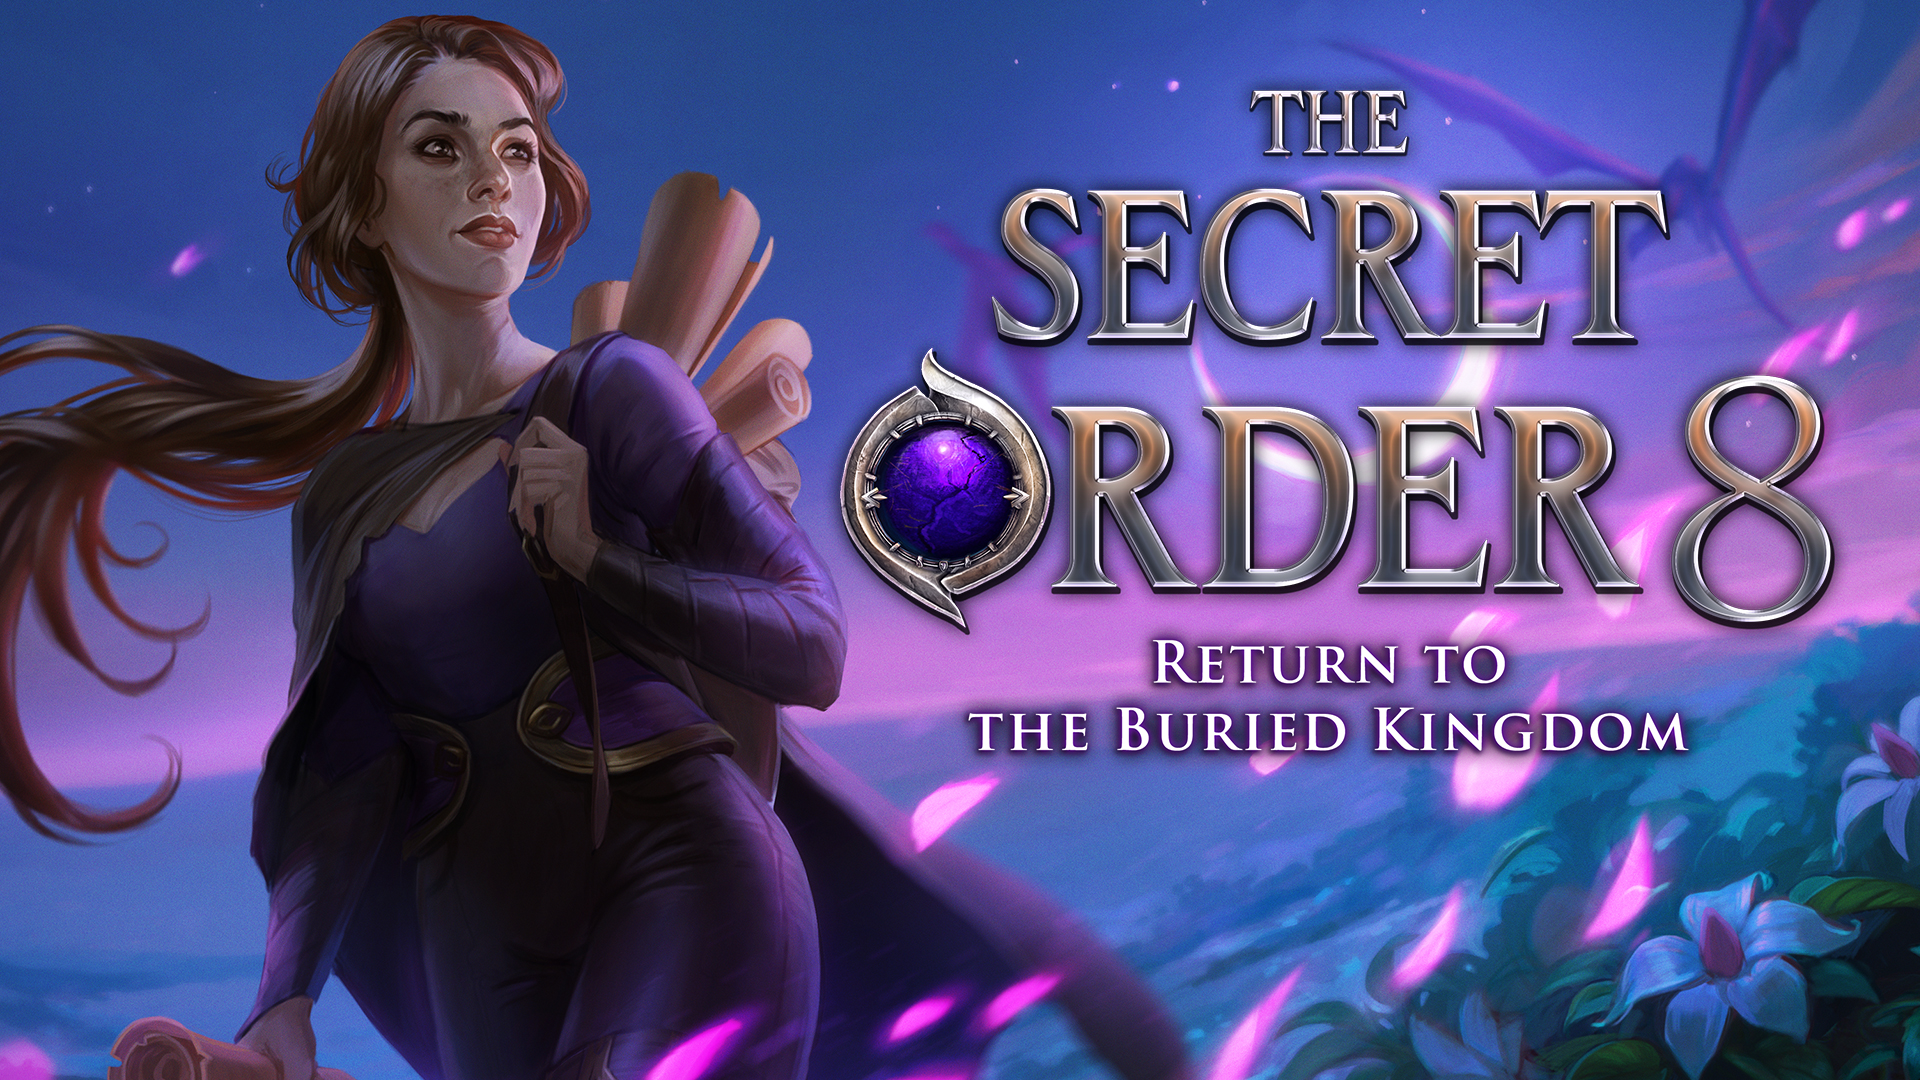 The Secret Order 8: Return to the Buried Kingdom for iphone instal